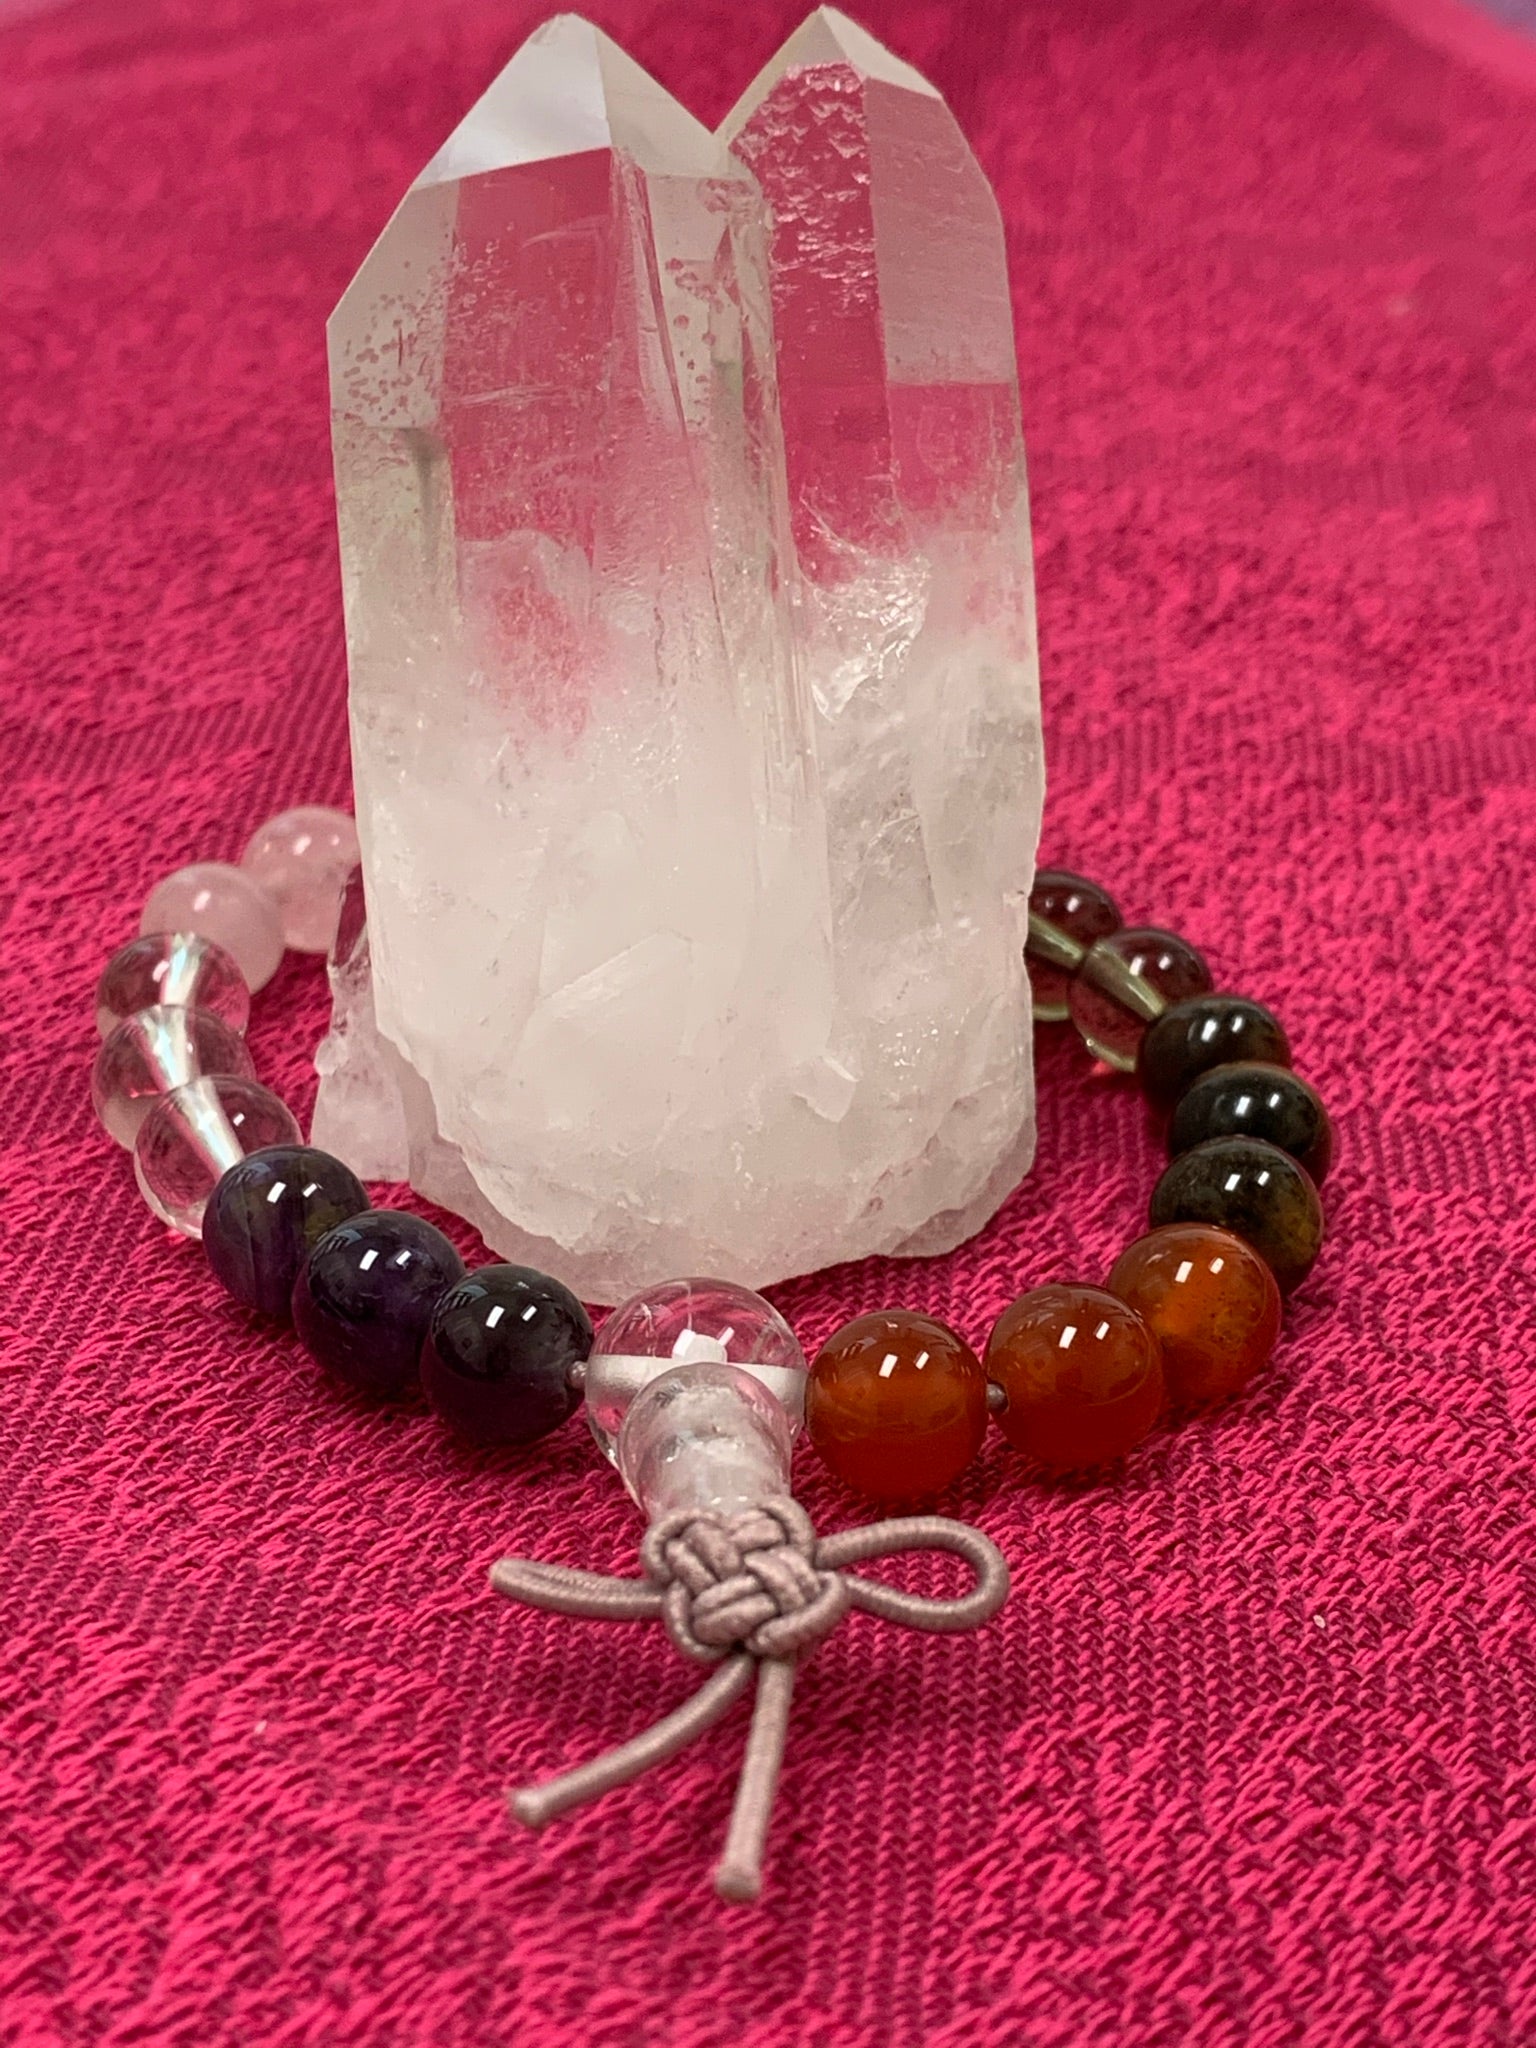 Second close-up view. Mixed gemstone power bracelet with 7 different gemstones: amethyst, clear quartz, rose quartz, smoky quartz, tiger eye, carnelian, and aventurine. The bracelet is accented by a Chinese tassel knot.